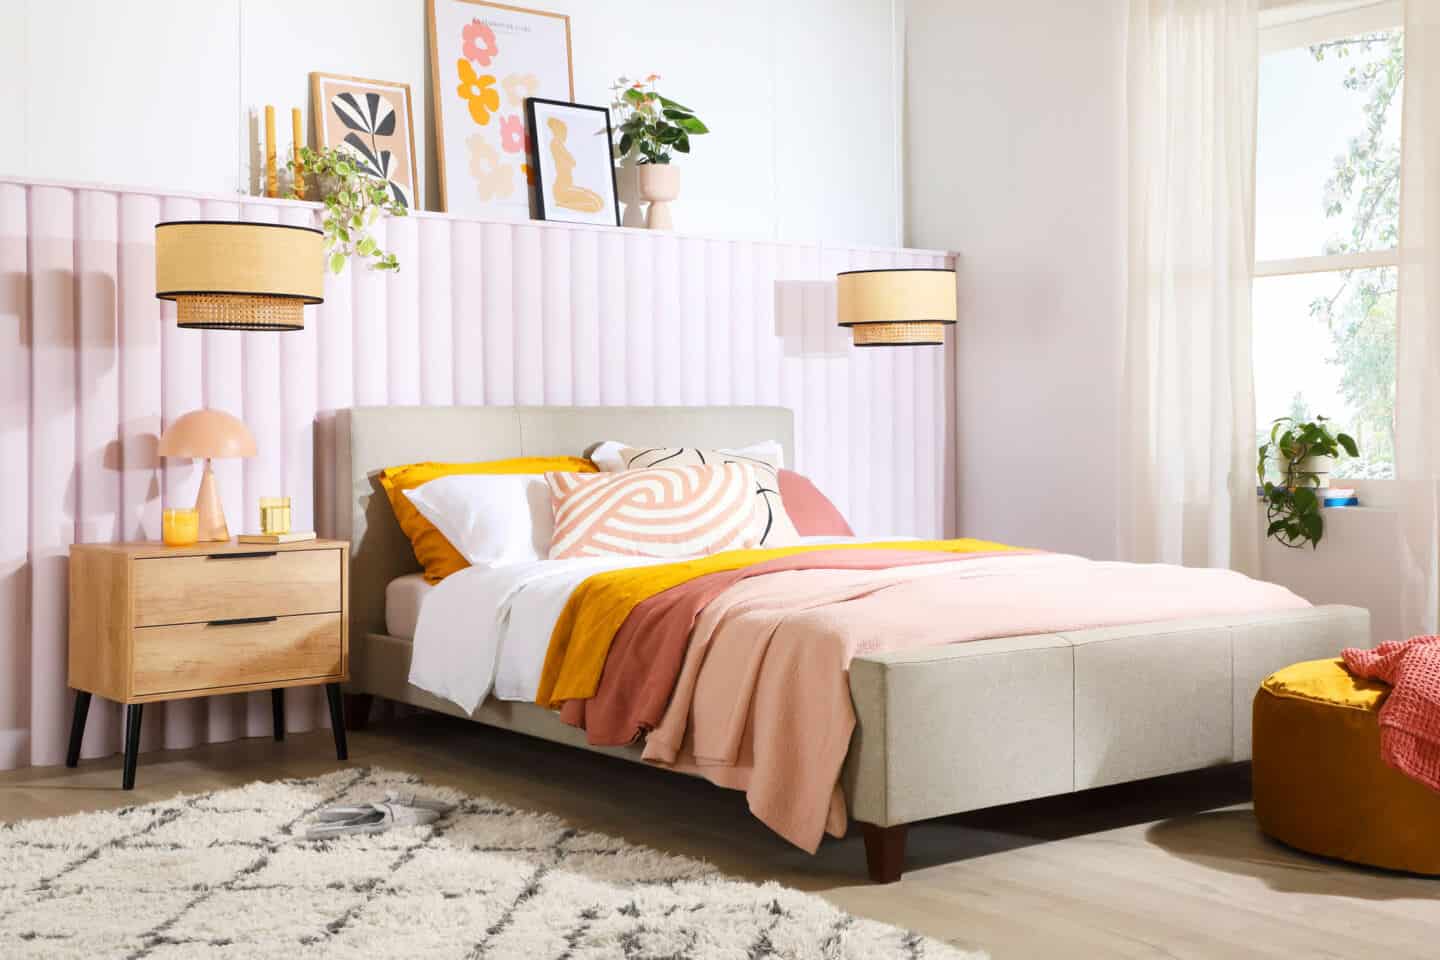 A bedroom in pastel colours with rattan lights hanging down on either side above the bedside tables